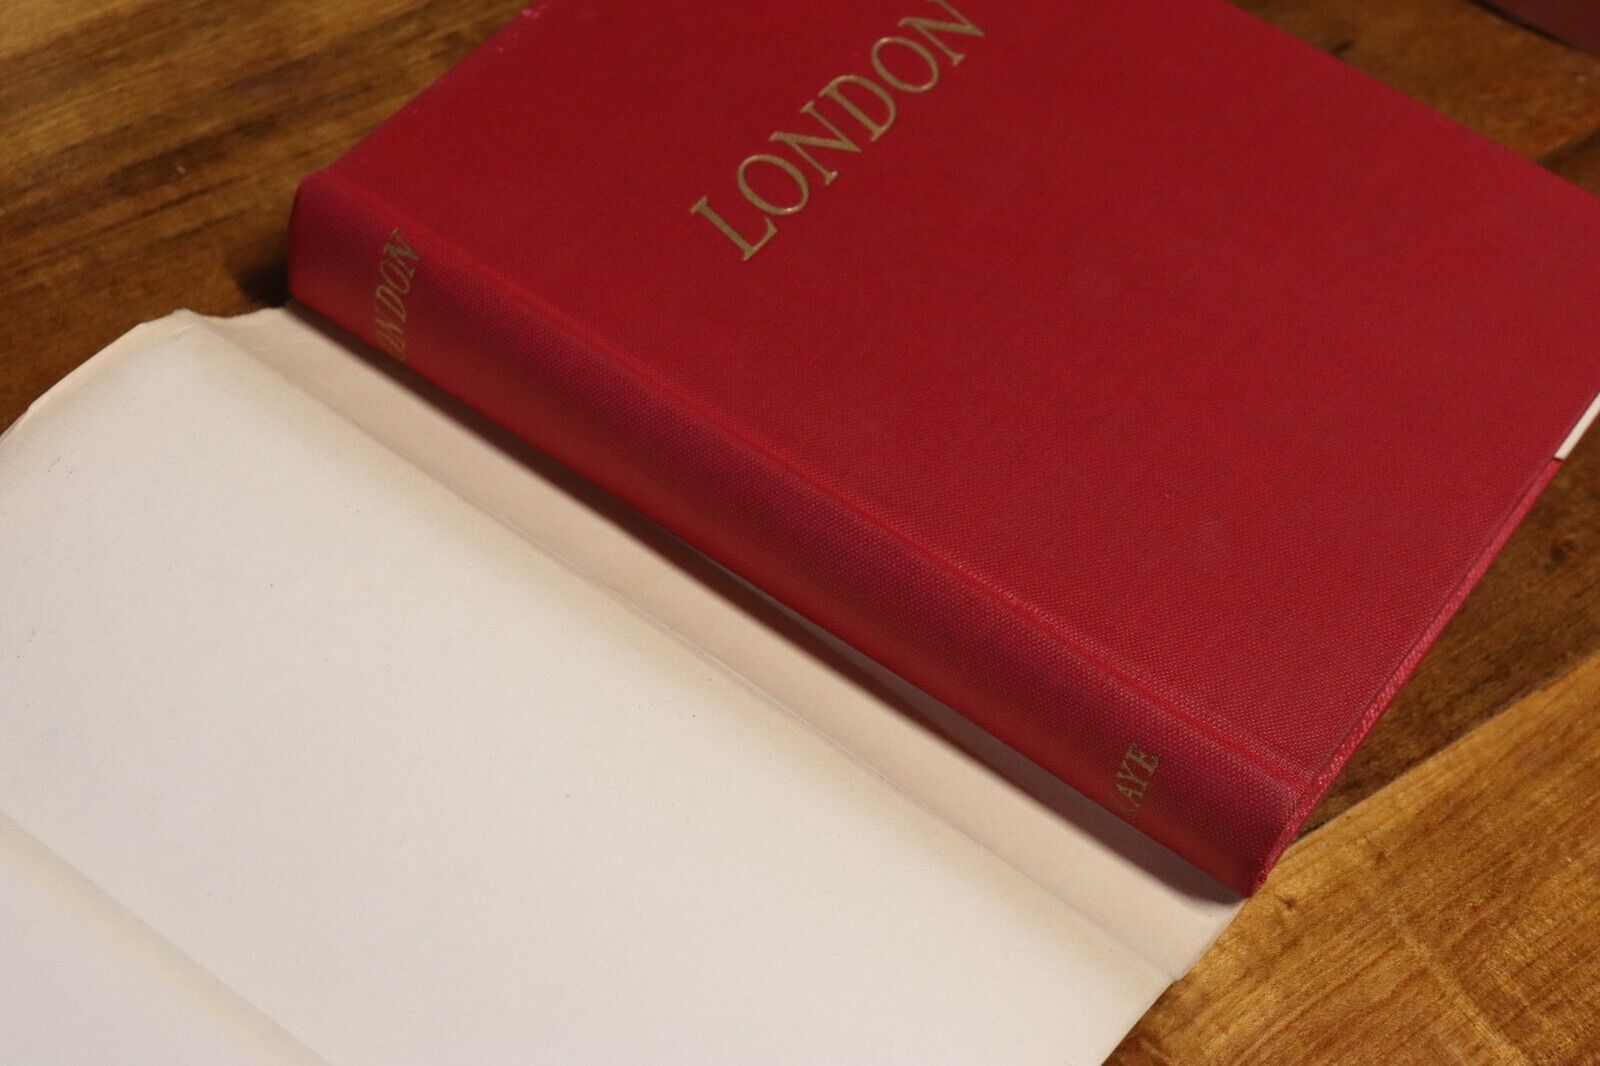 London by Jacques Boussard  - 1951 - Vintage British History Book